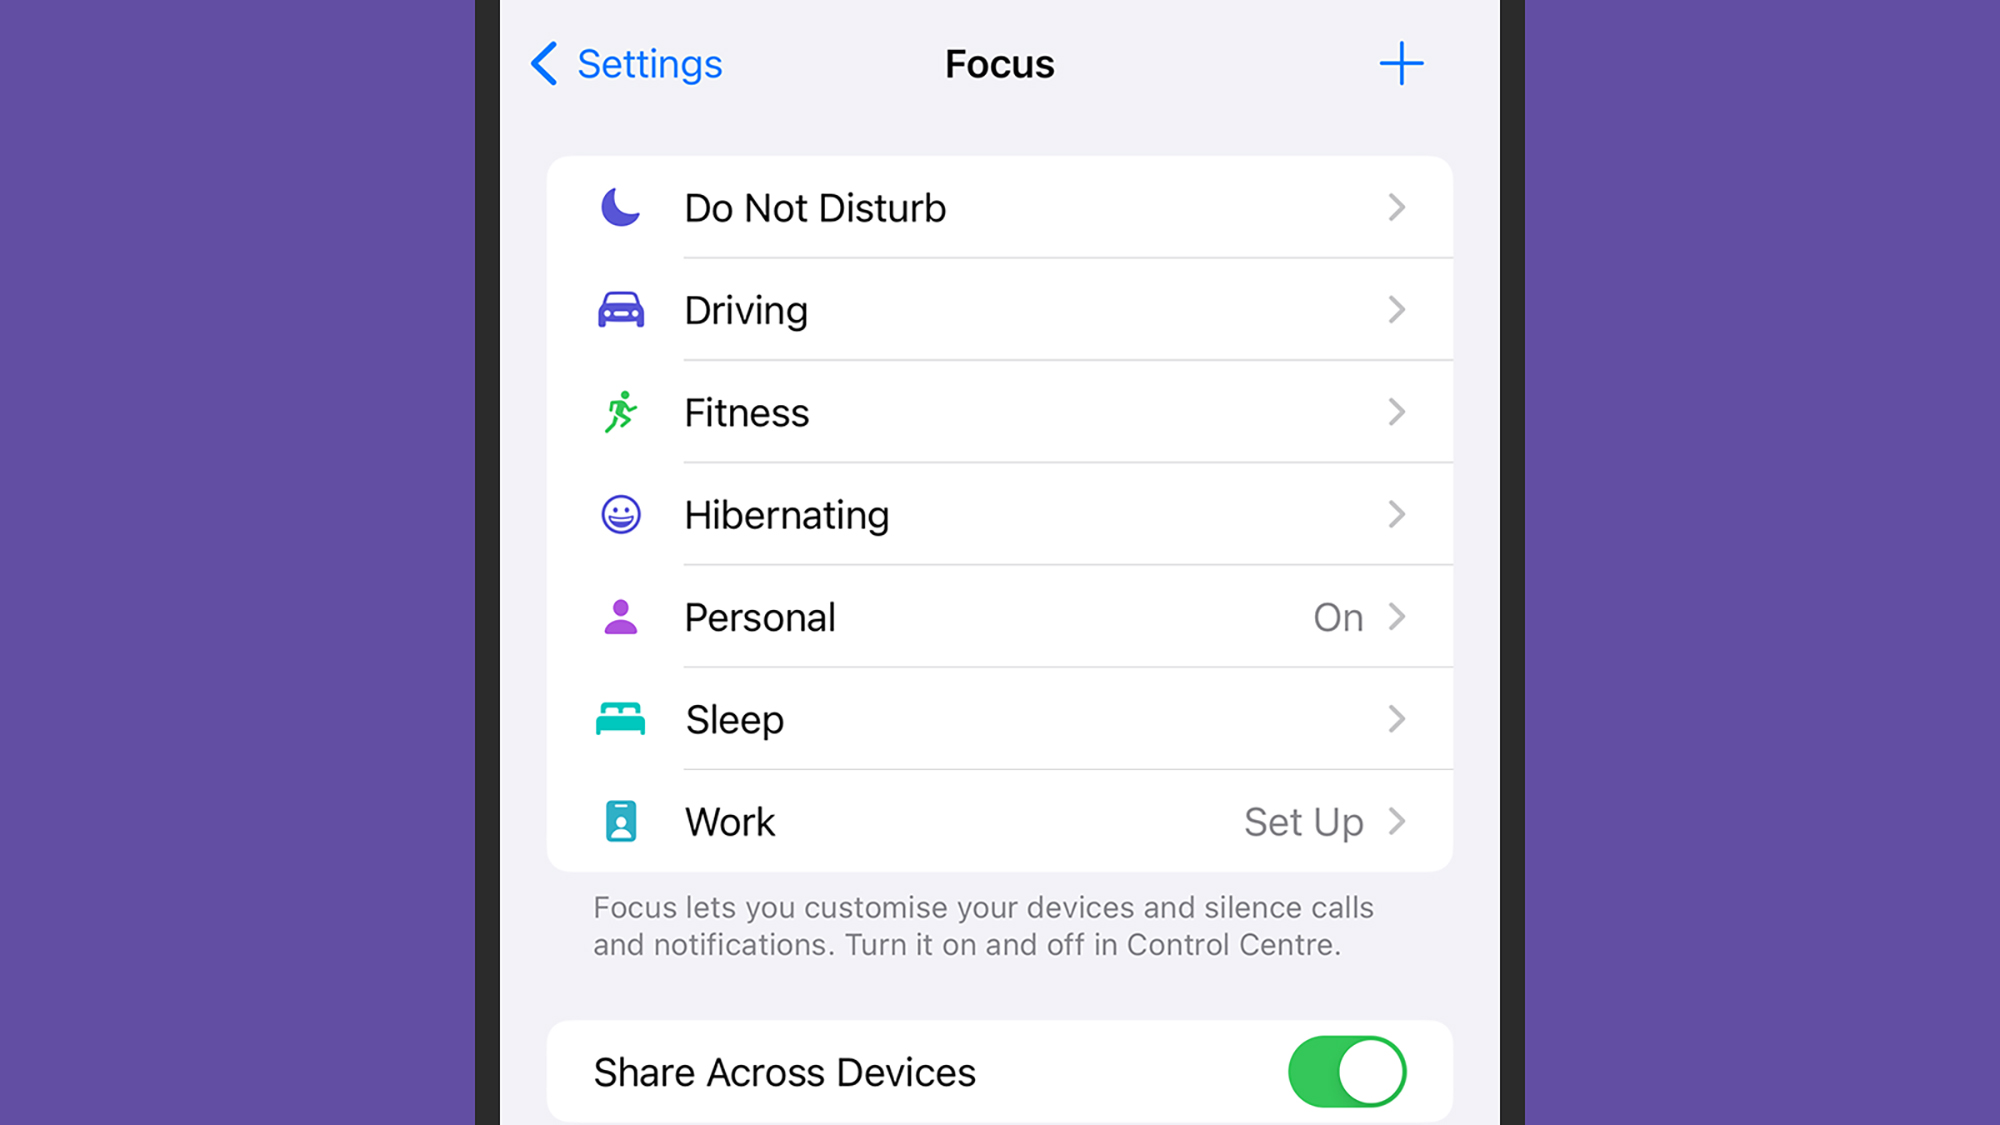 screenshot of focus options (do not disturb, driving, fitness, hibernating, personal) on an iPhone with purple background